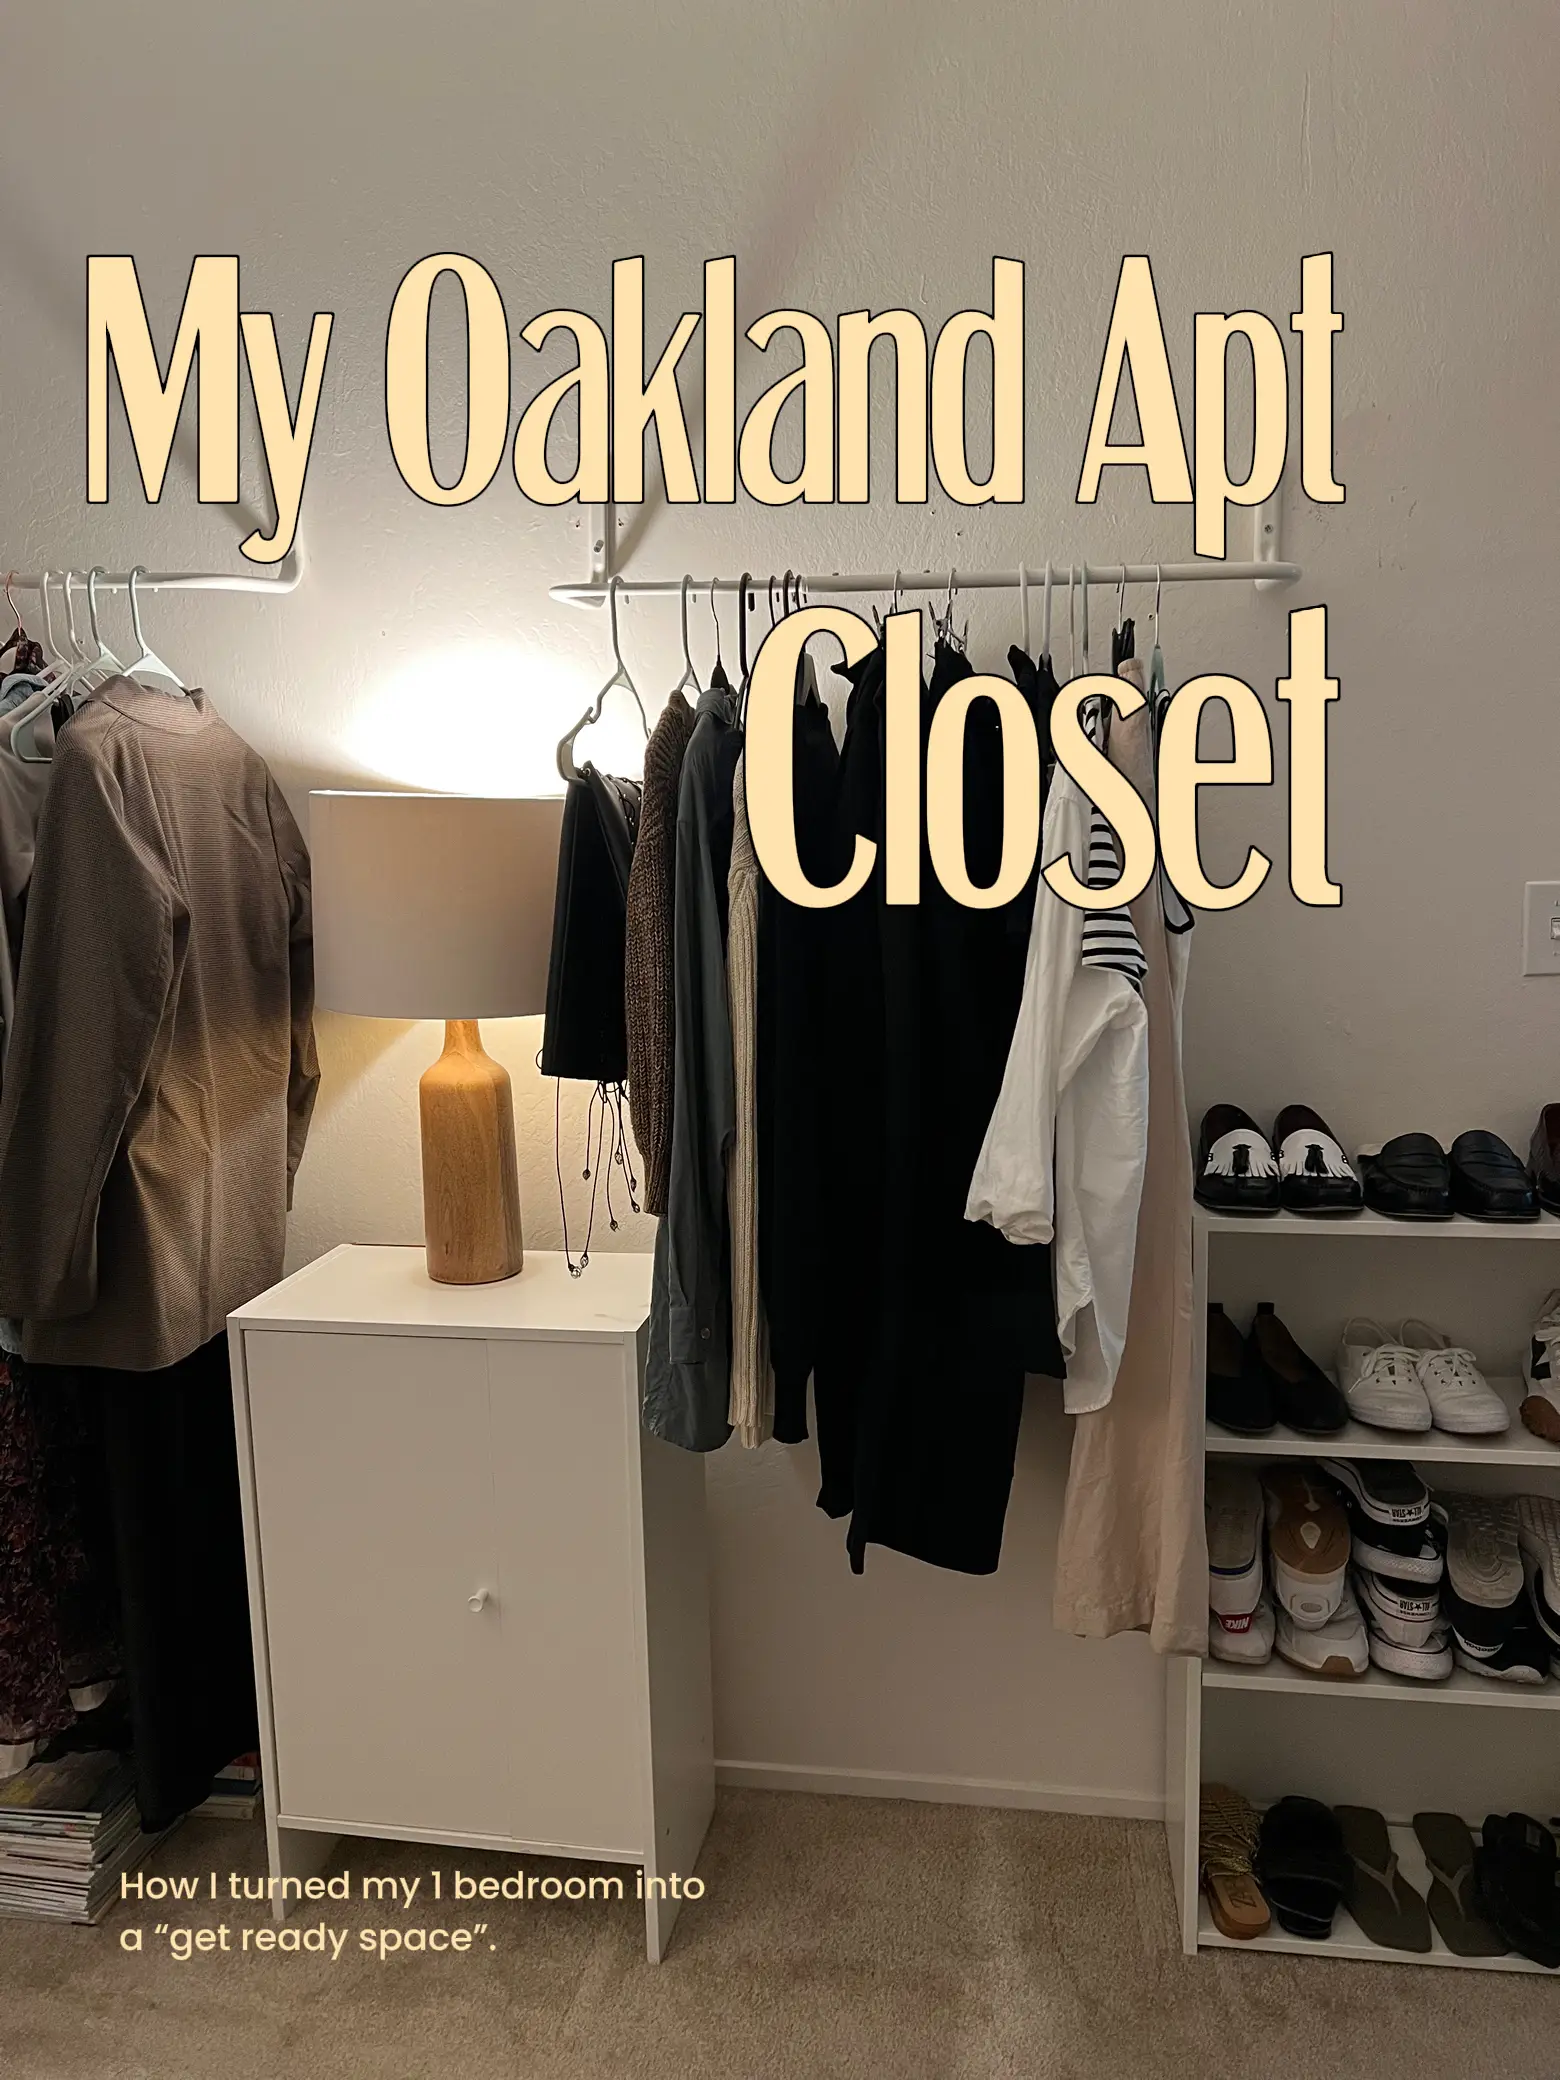 My Oakland Apt: Closet, Gallery posted by xiavanna